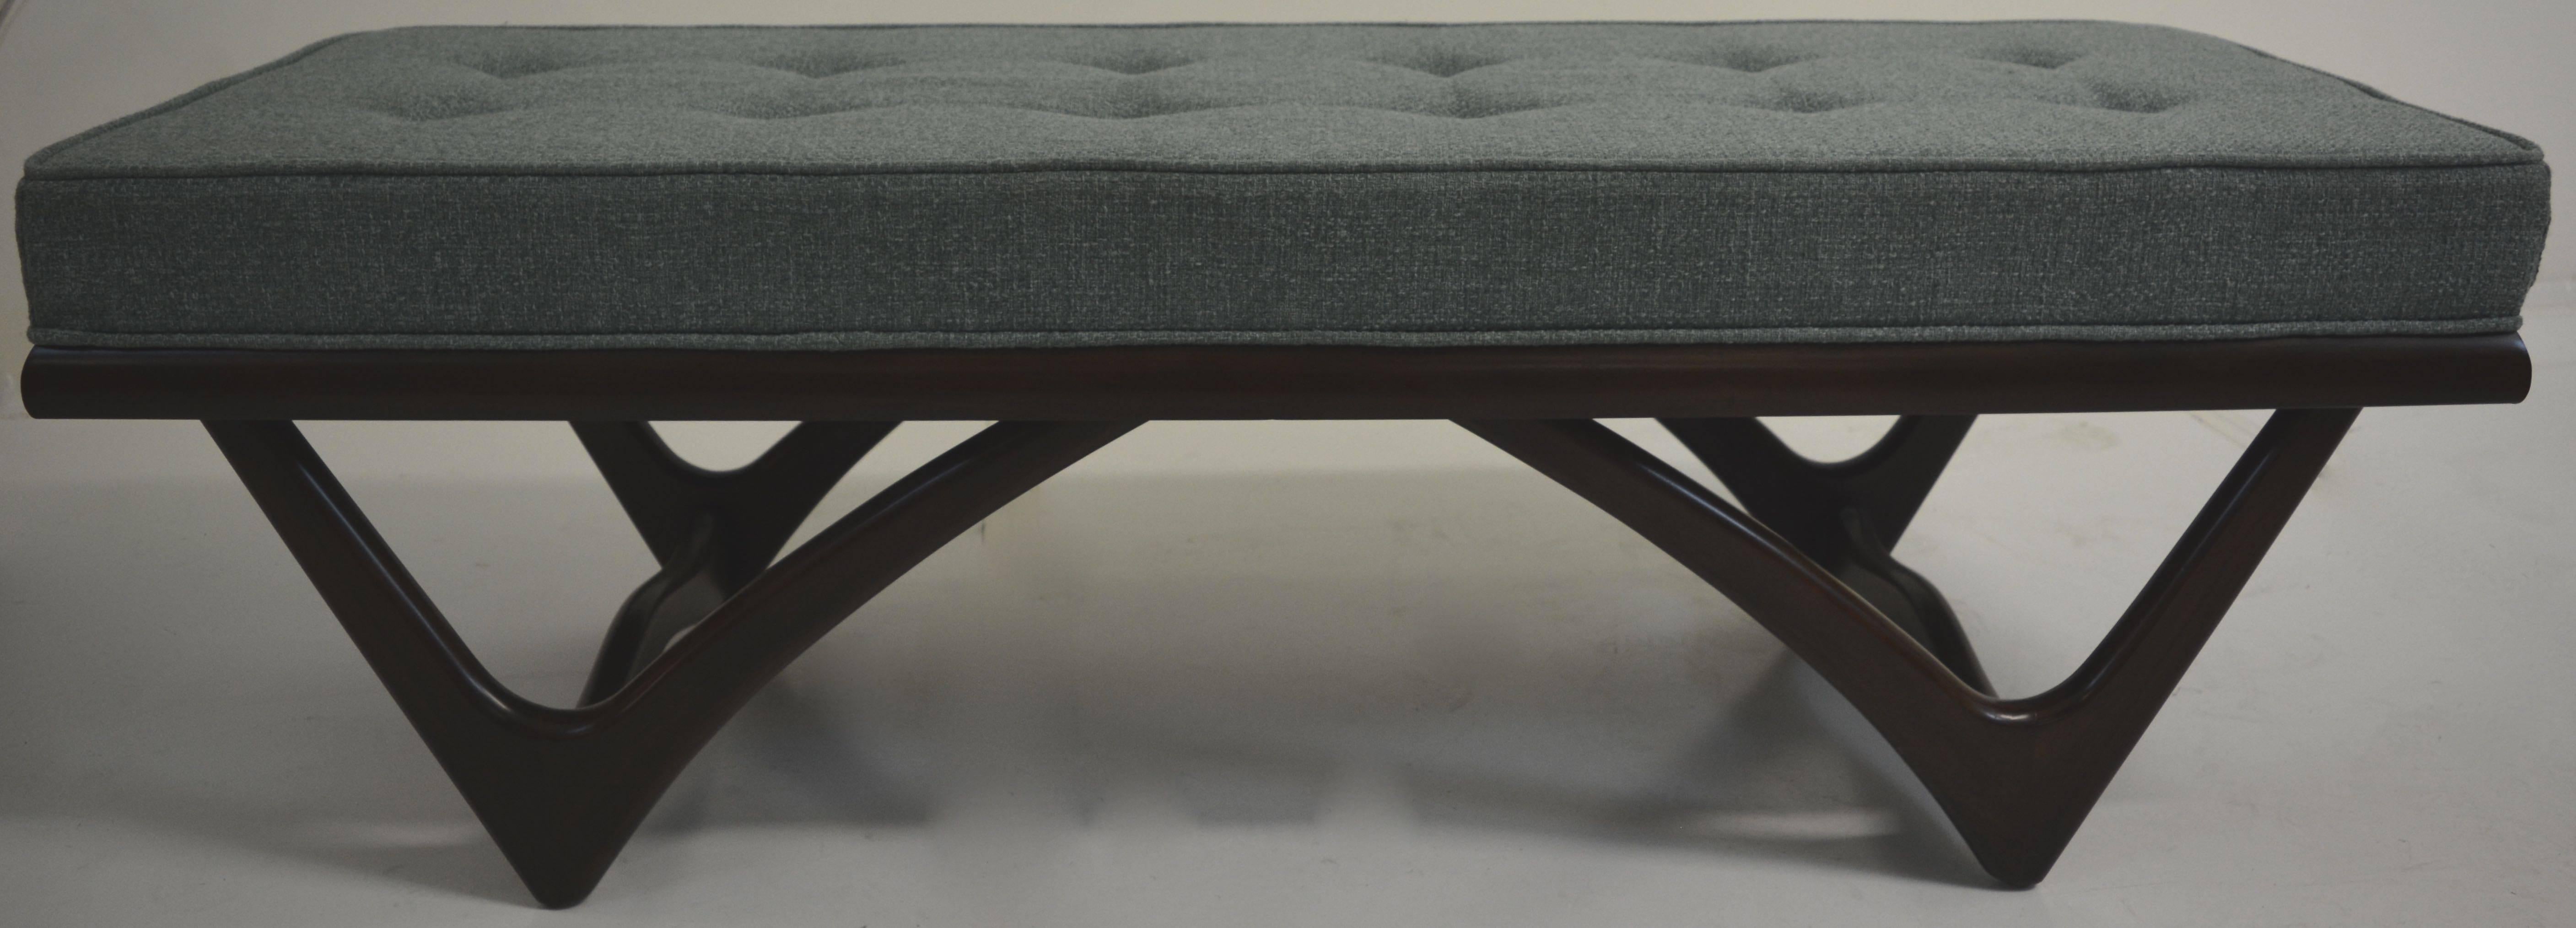 Adrian Pearsall Coffee Table that can also be used as a bench. Refinished in a walnut hue and recently upholstered in a woven green vintage style fabric.